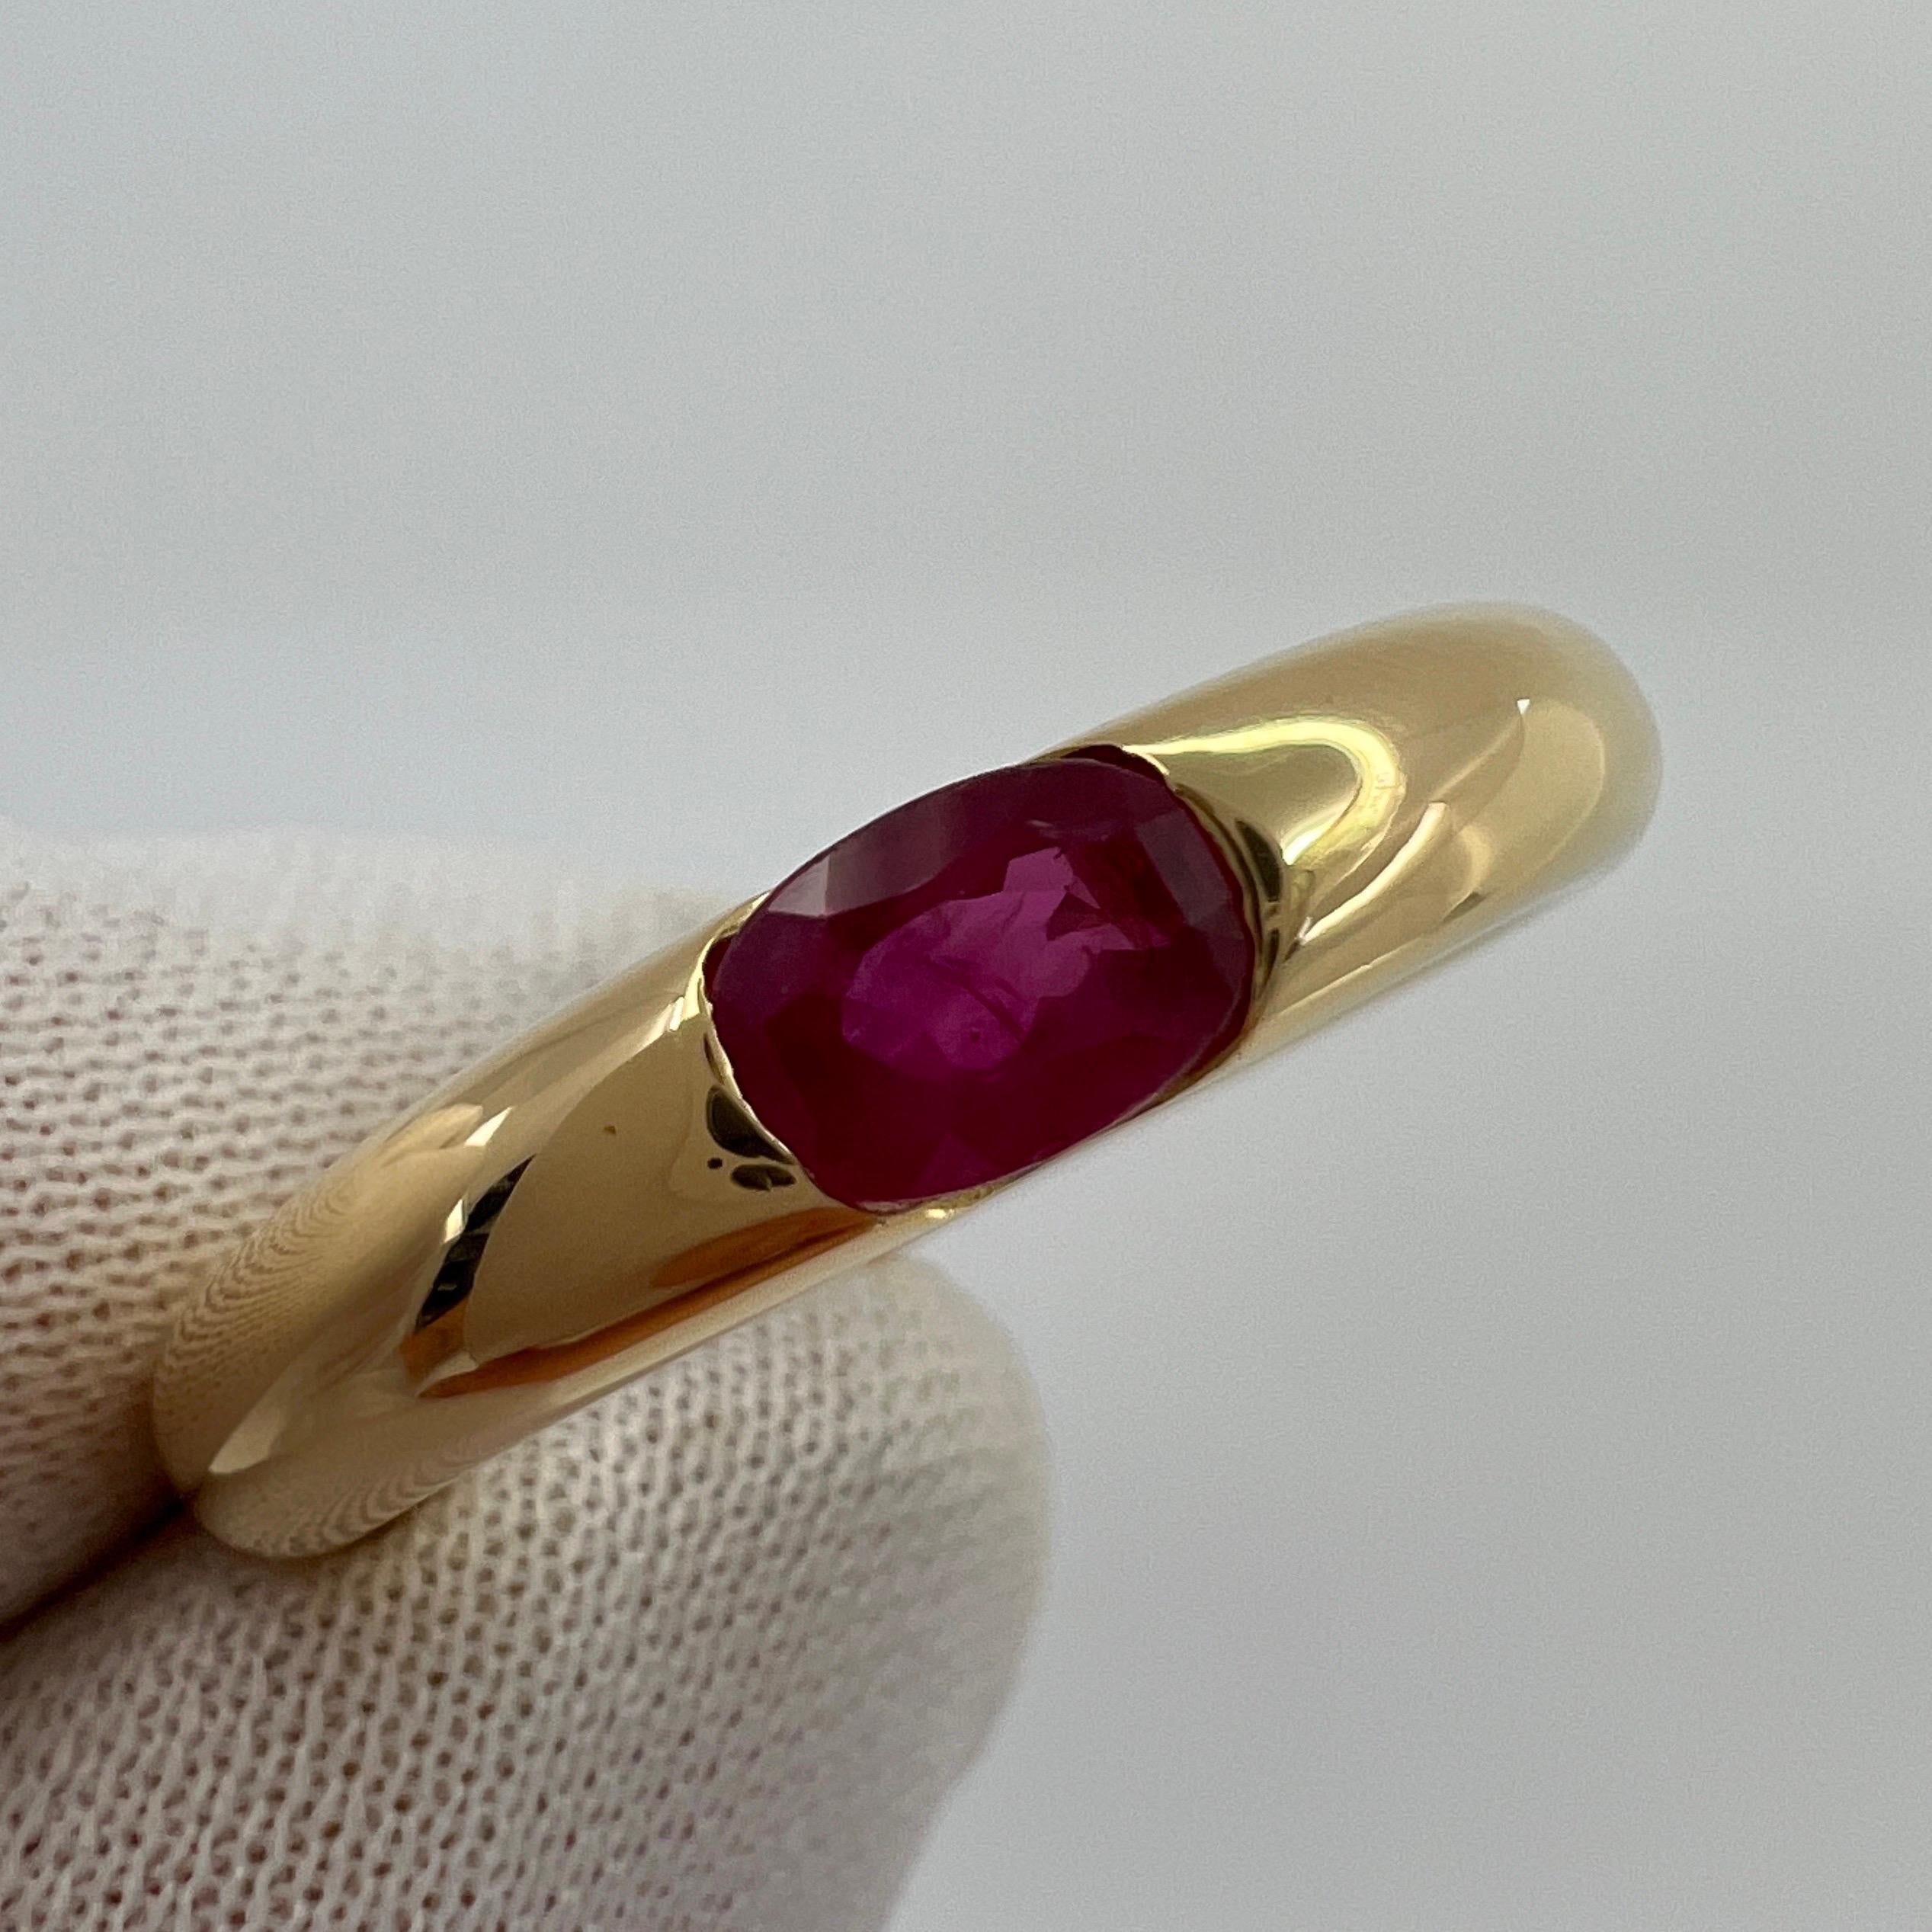 Vintage Cartier Deep Red Ruby Ellipse 18k Yellow Gold Oval Cut Solitaire Ring 1